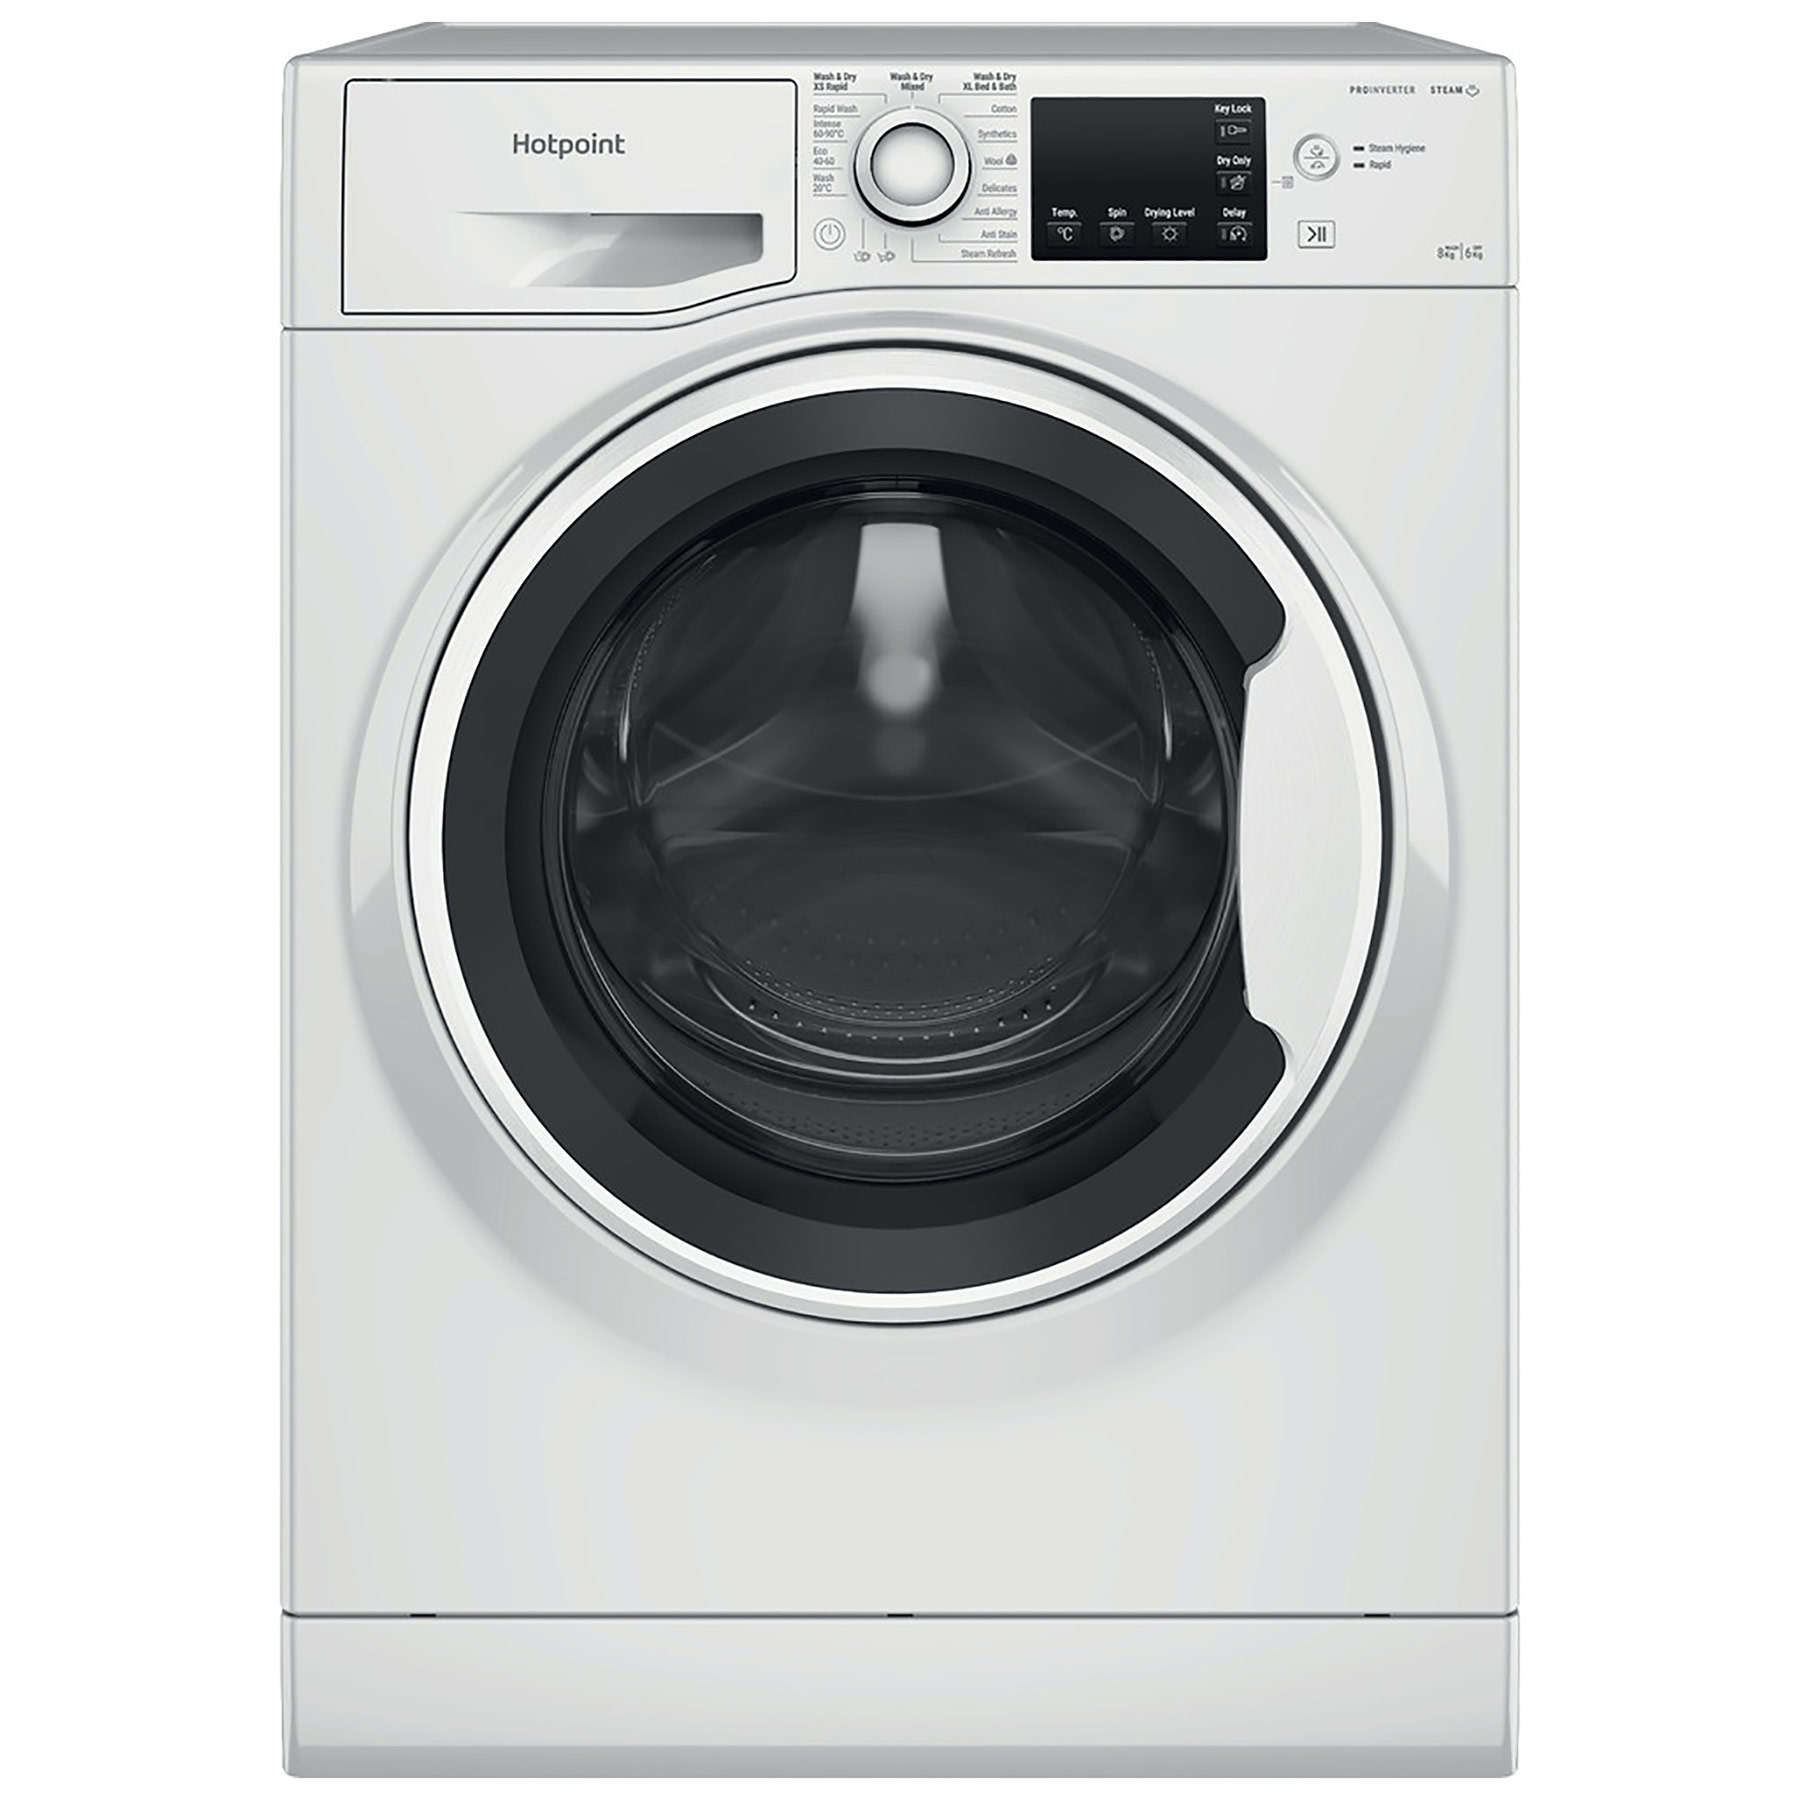 Image of Hotpoint NDB8635WUK Washer Dryer in White 1400rpm 8kg 6kg D Rated